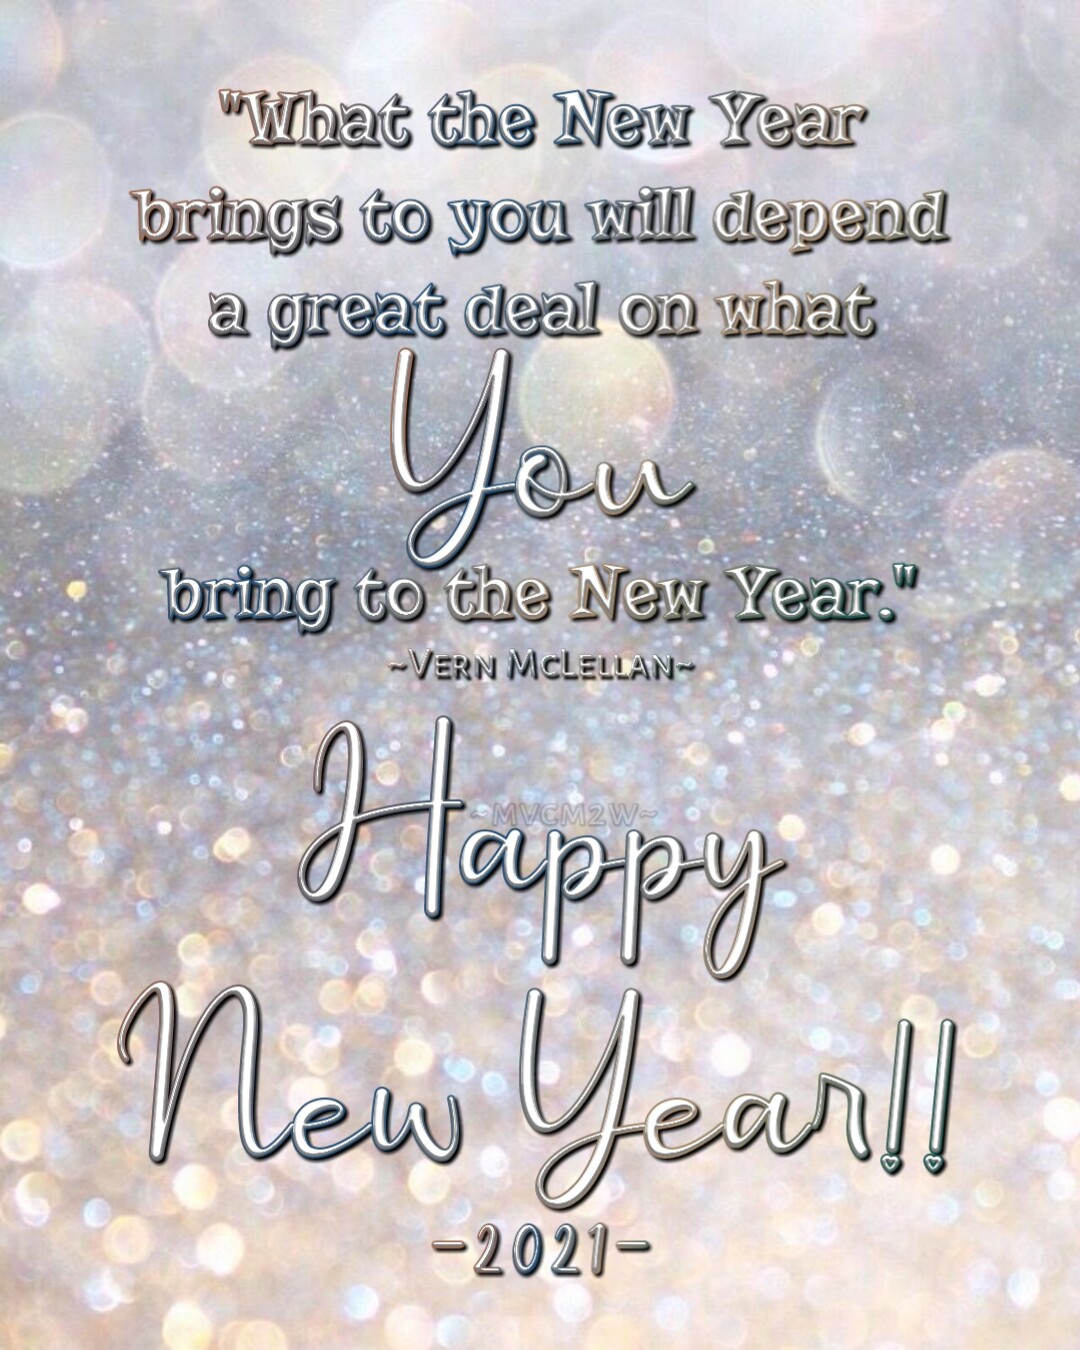 Bible Quotes by MVCquotes - Have a Blessed New Year!